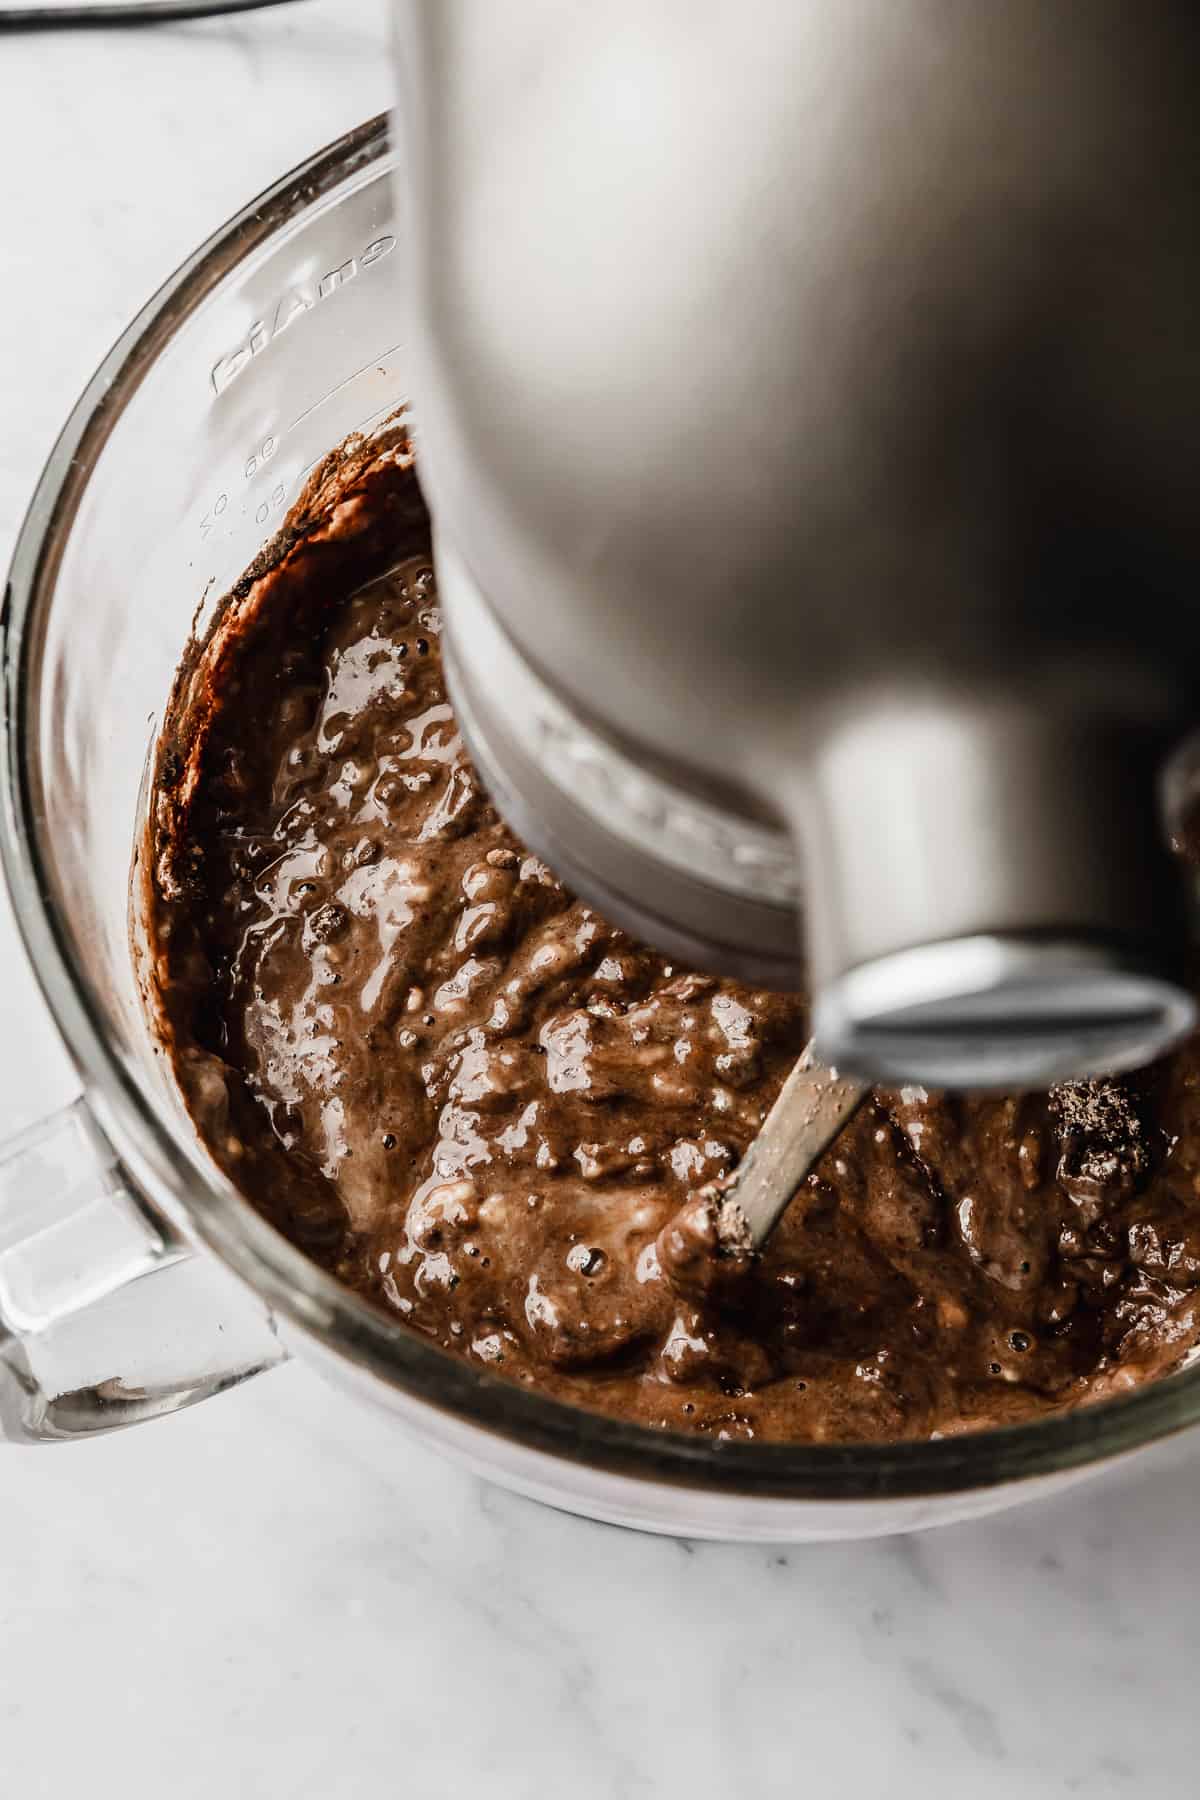 A dark chocolate Bundt Cake batter being mixed in a glass stand mixer bowl attached to a silver kitchen aid.